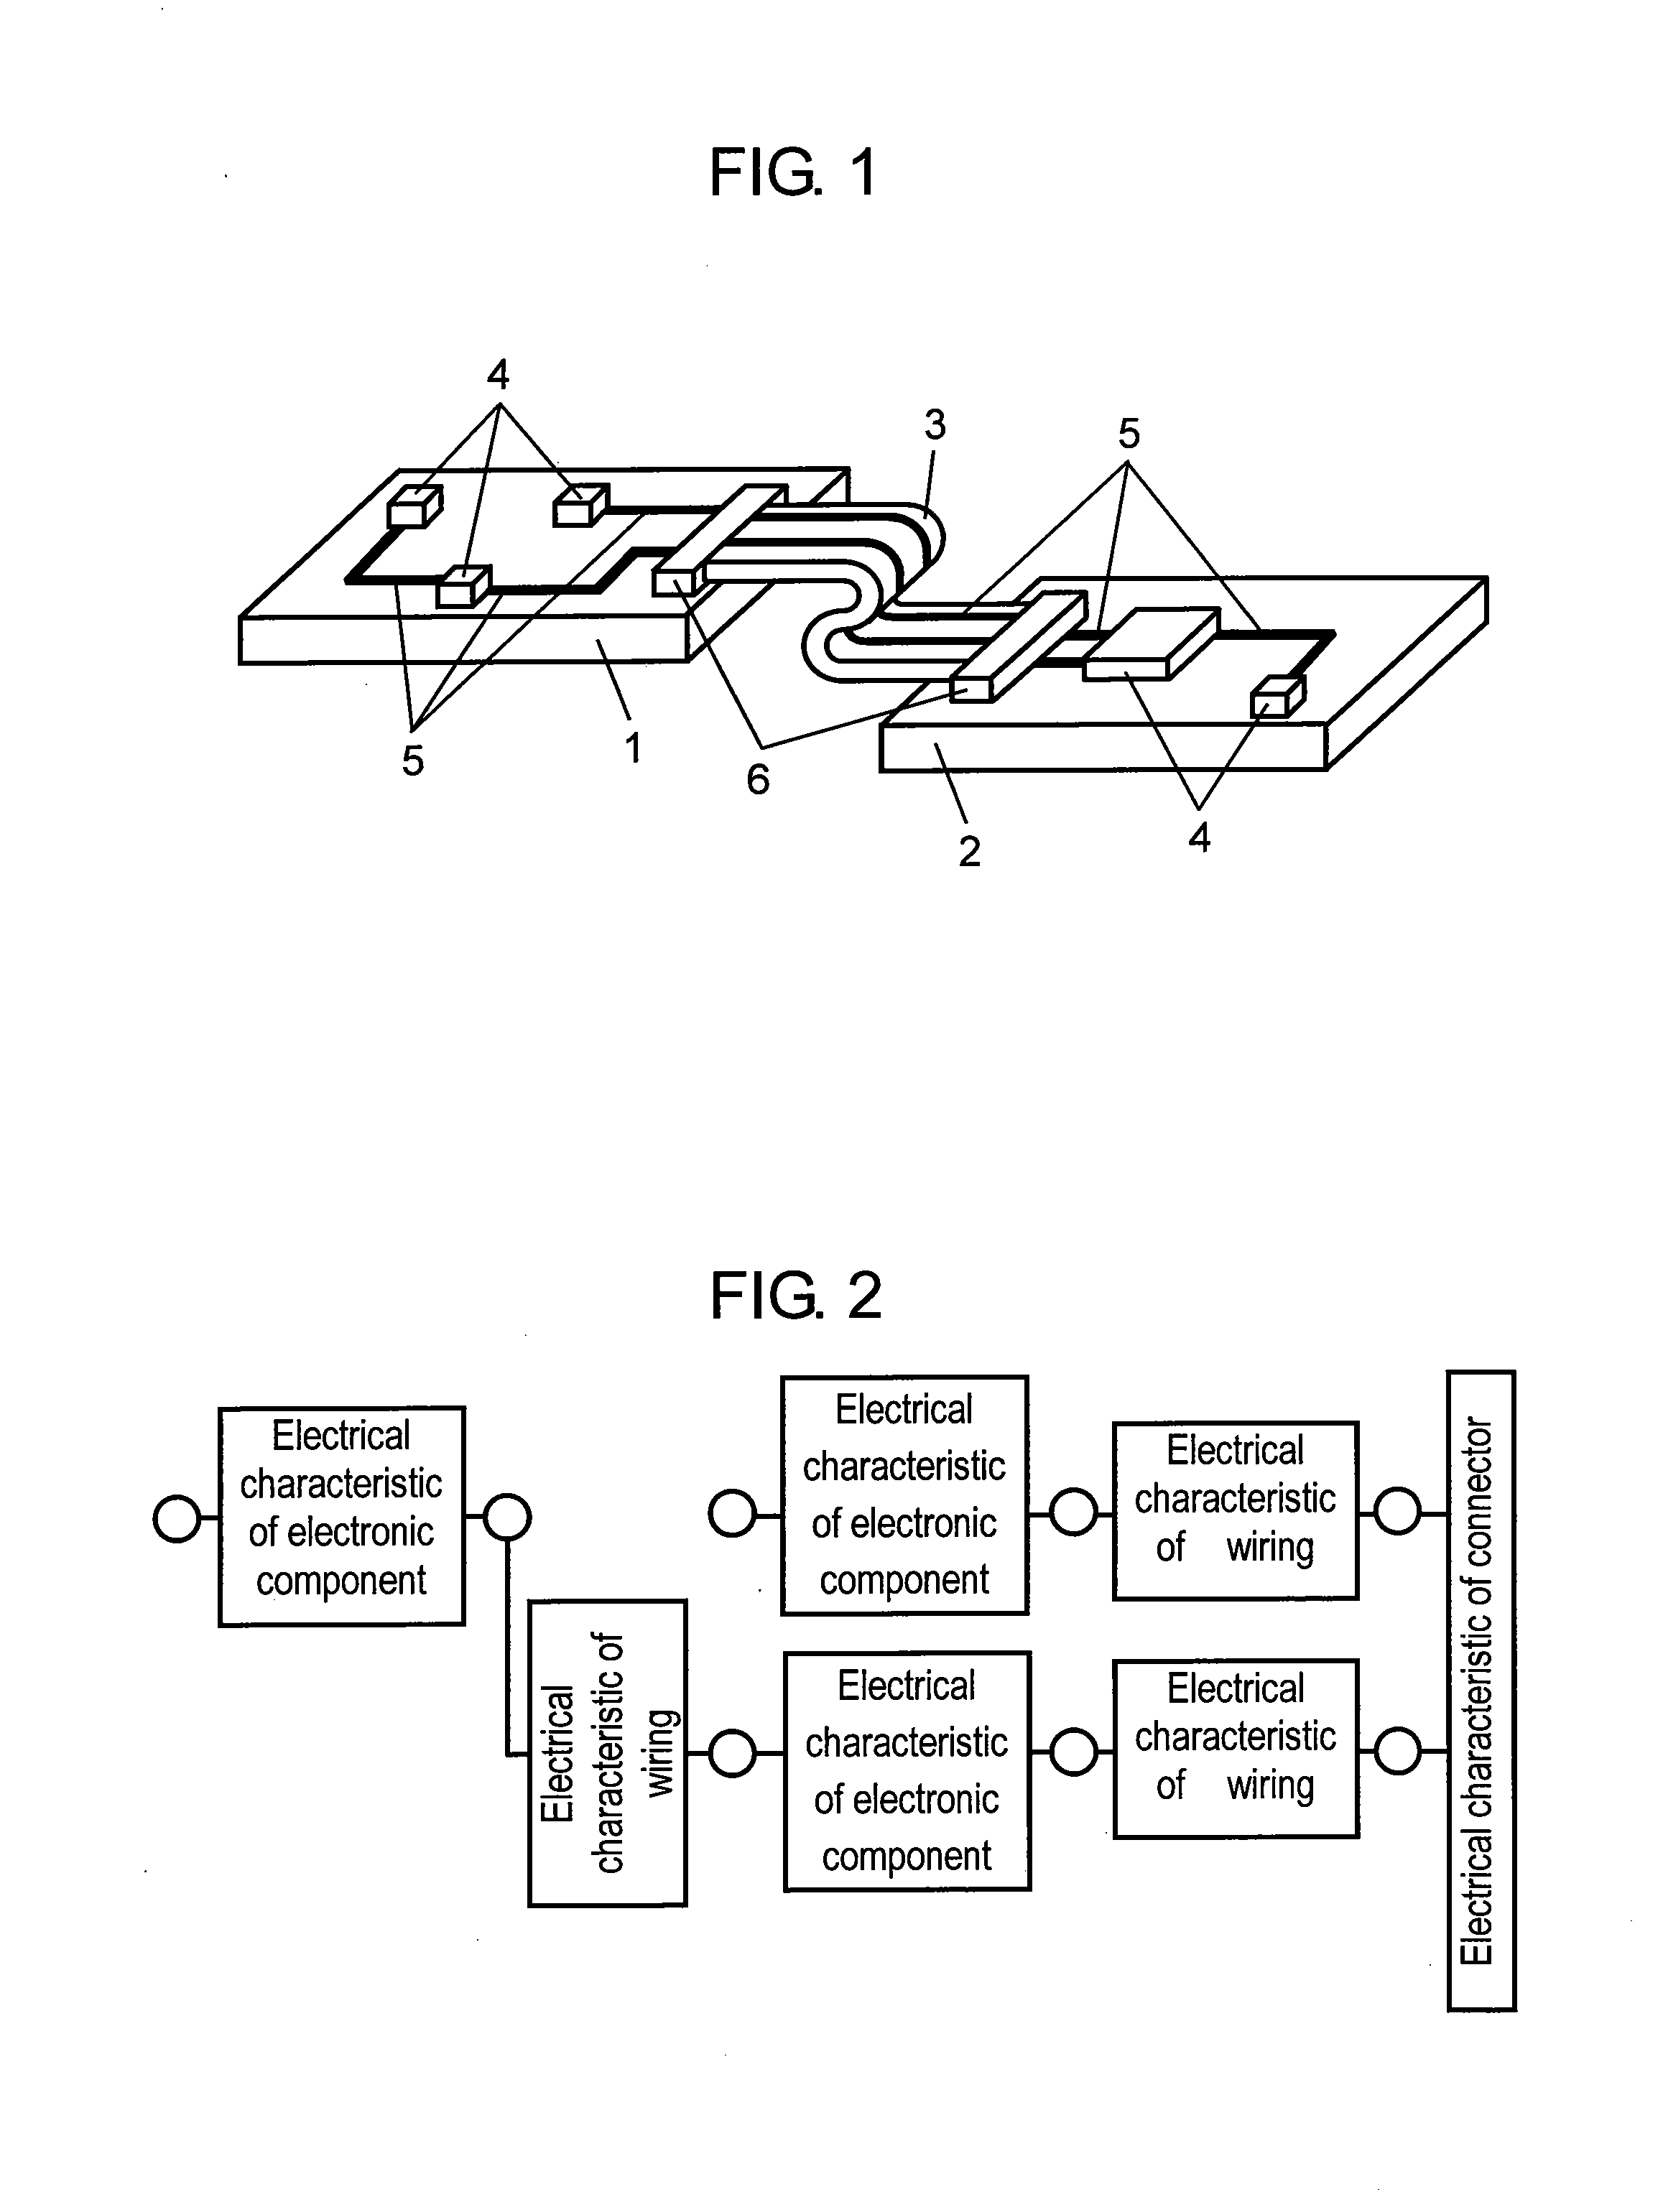 Library for electric circuit simulation, recording medium storing it, and library generation system